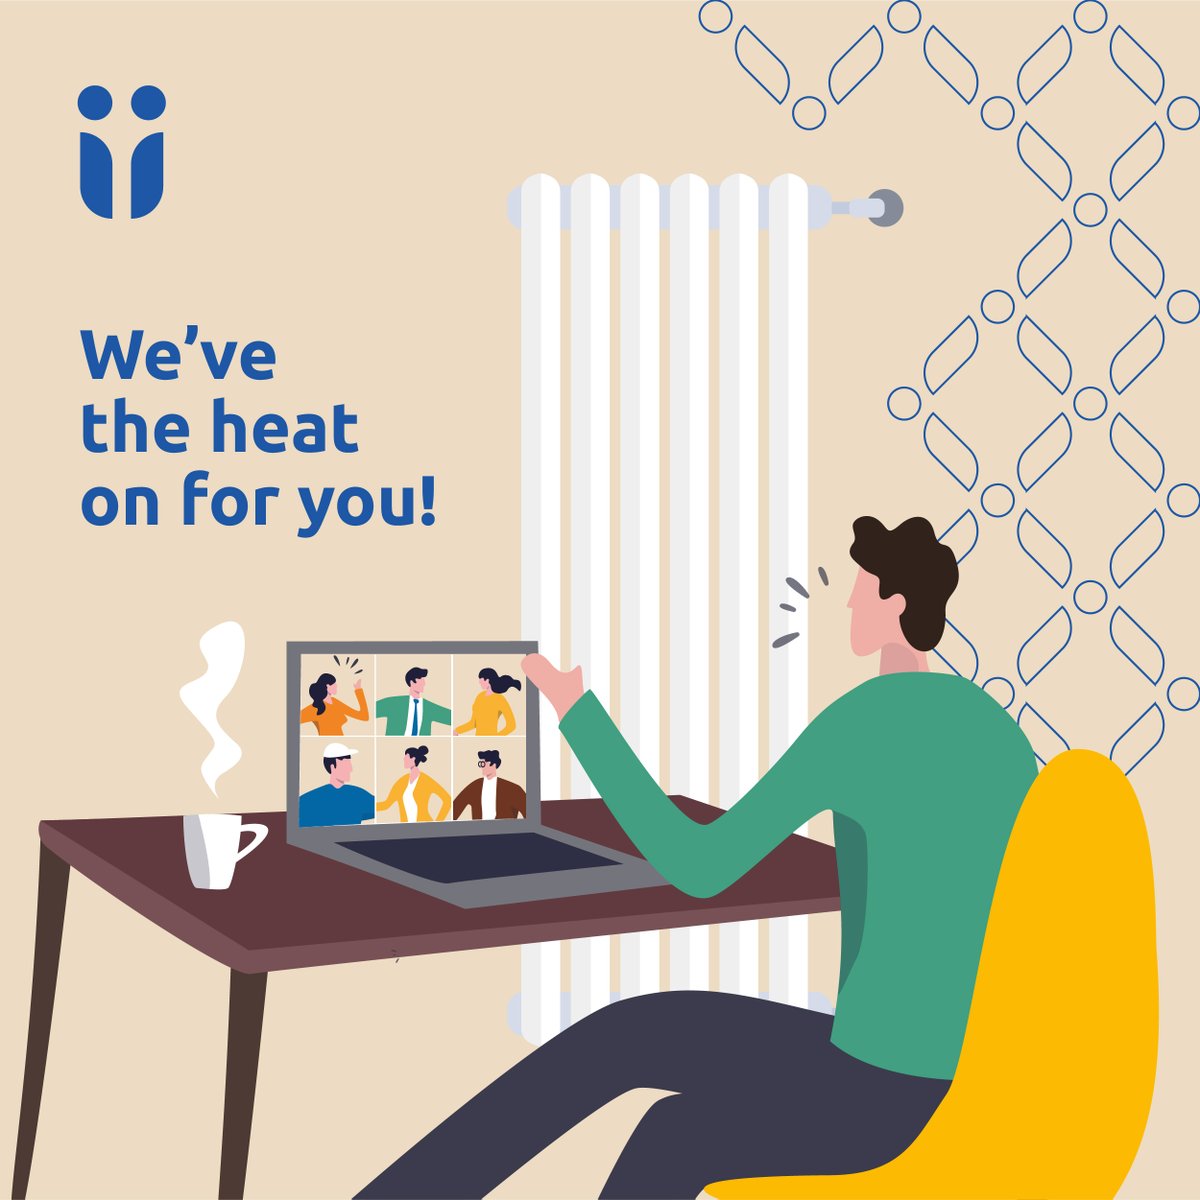 We are open!
For anyone in the area with no power today, we're offering a 50% discount. Use code ii-Half-Price when booking a #HotDesk at theii.com
#Donegal #RemoteWorking #Ireland #Inishowen